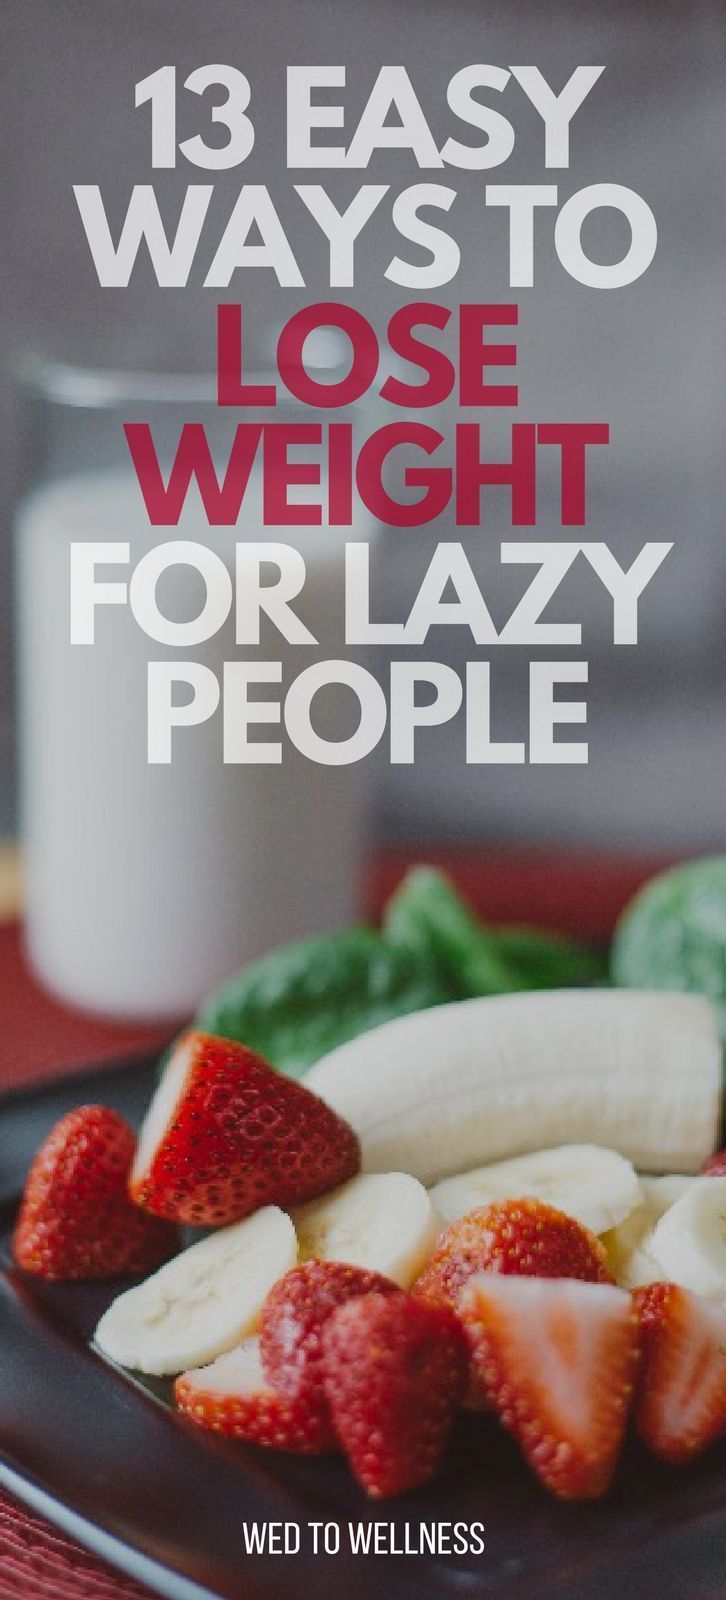 13 Easy Ways to Lose Weight for Lazy People -   10 diet Wallpaper simple ideas